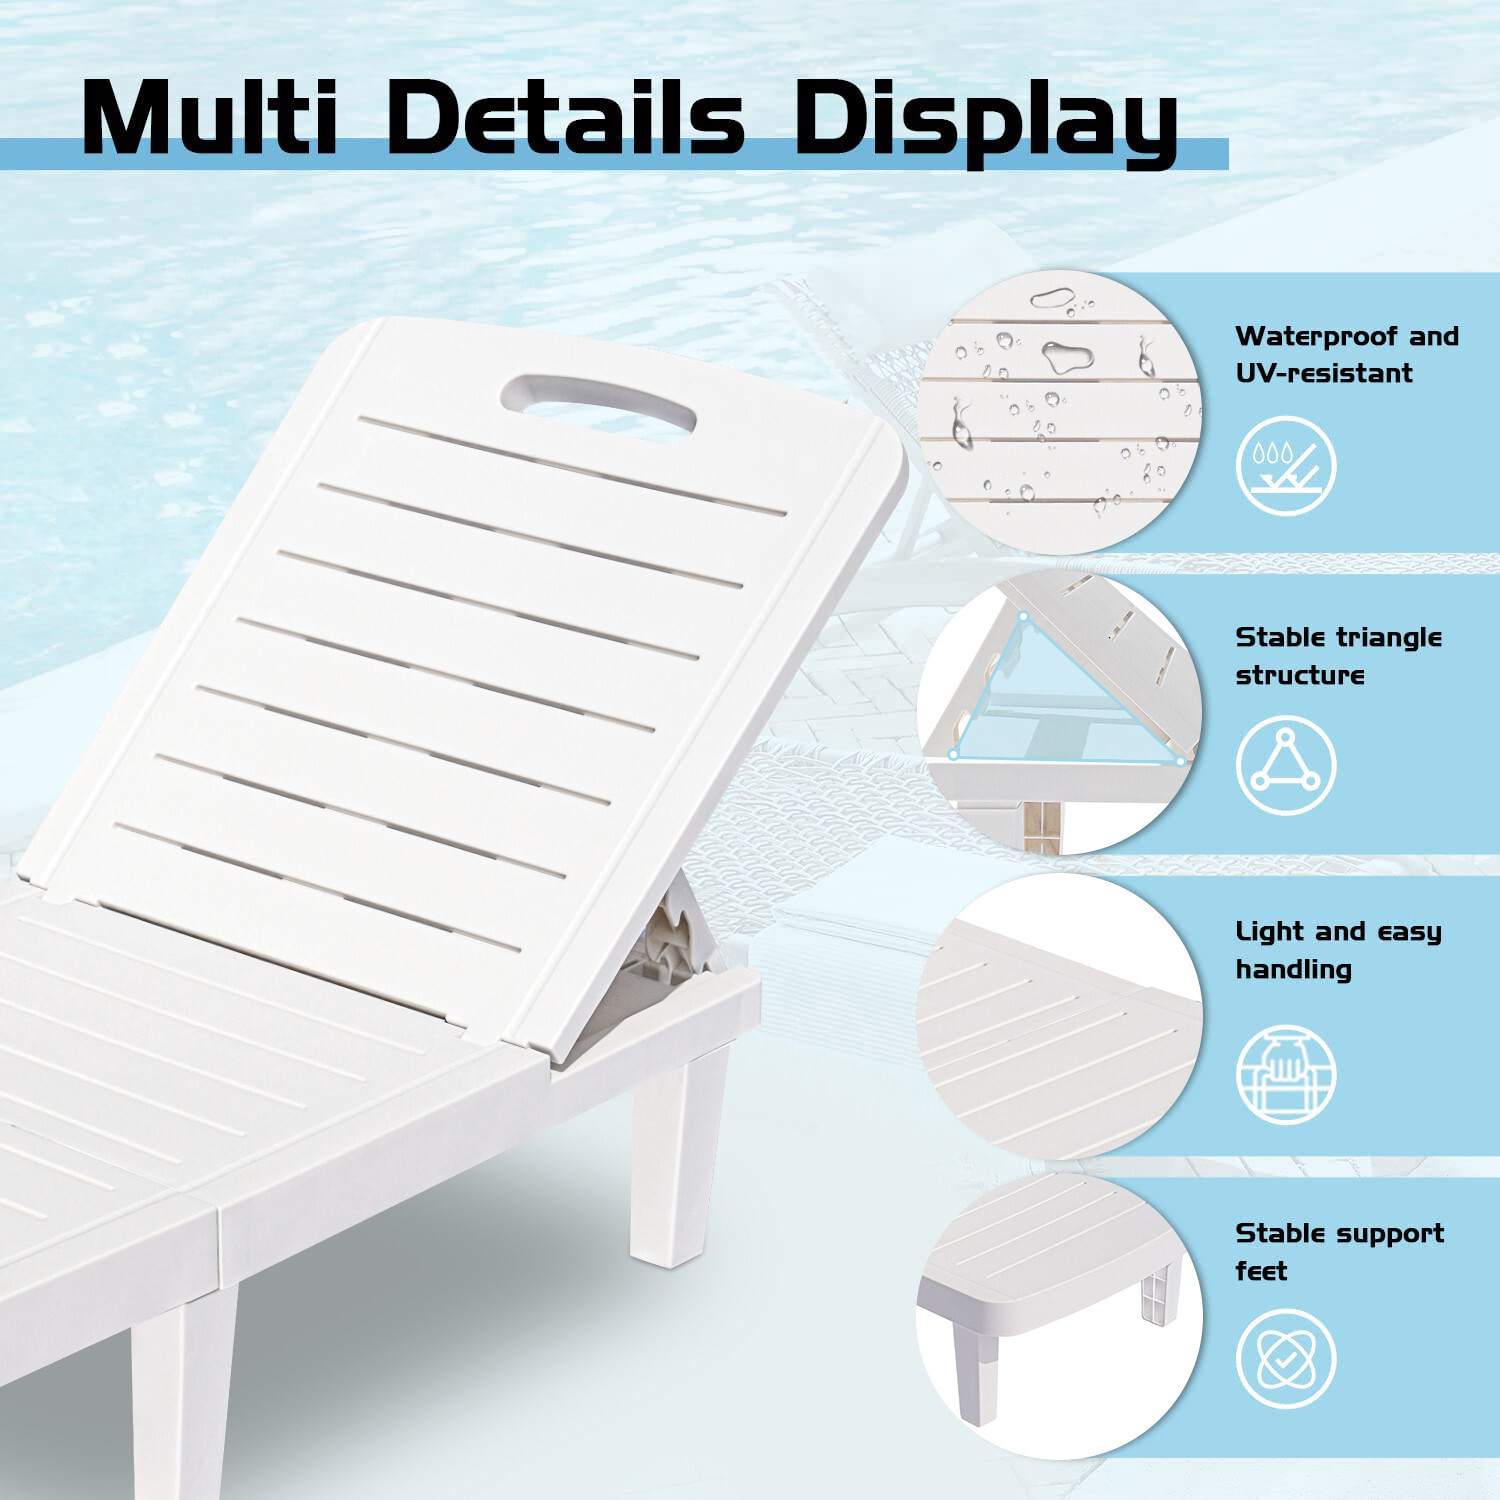 Pool Lounge Chairs Set of 2, Patio Chaise Lounge Chairs Outdoor Furniture Set for 2 with Adjustable Back and Retractable Tray, All-Weather Plastic Reclining Lounge Chair LLL1713 - image 5 of 10